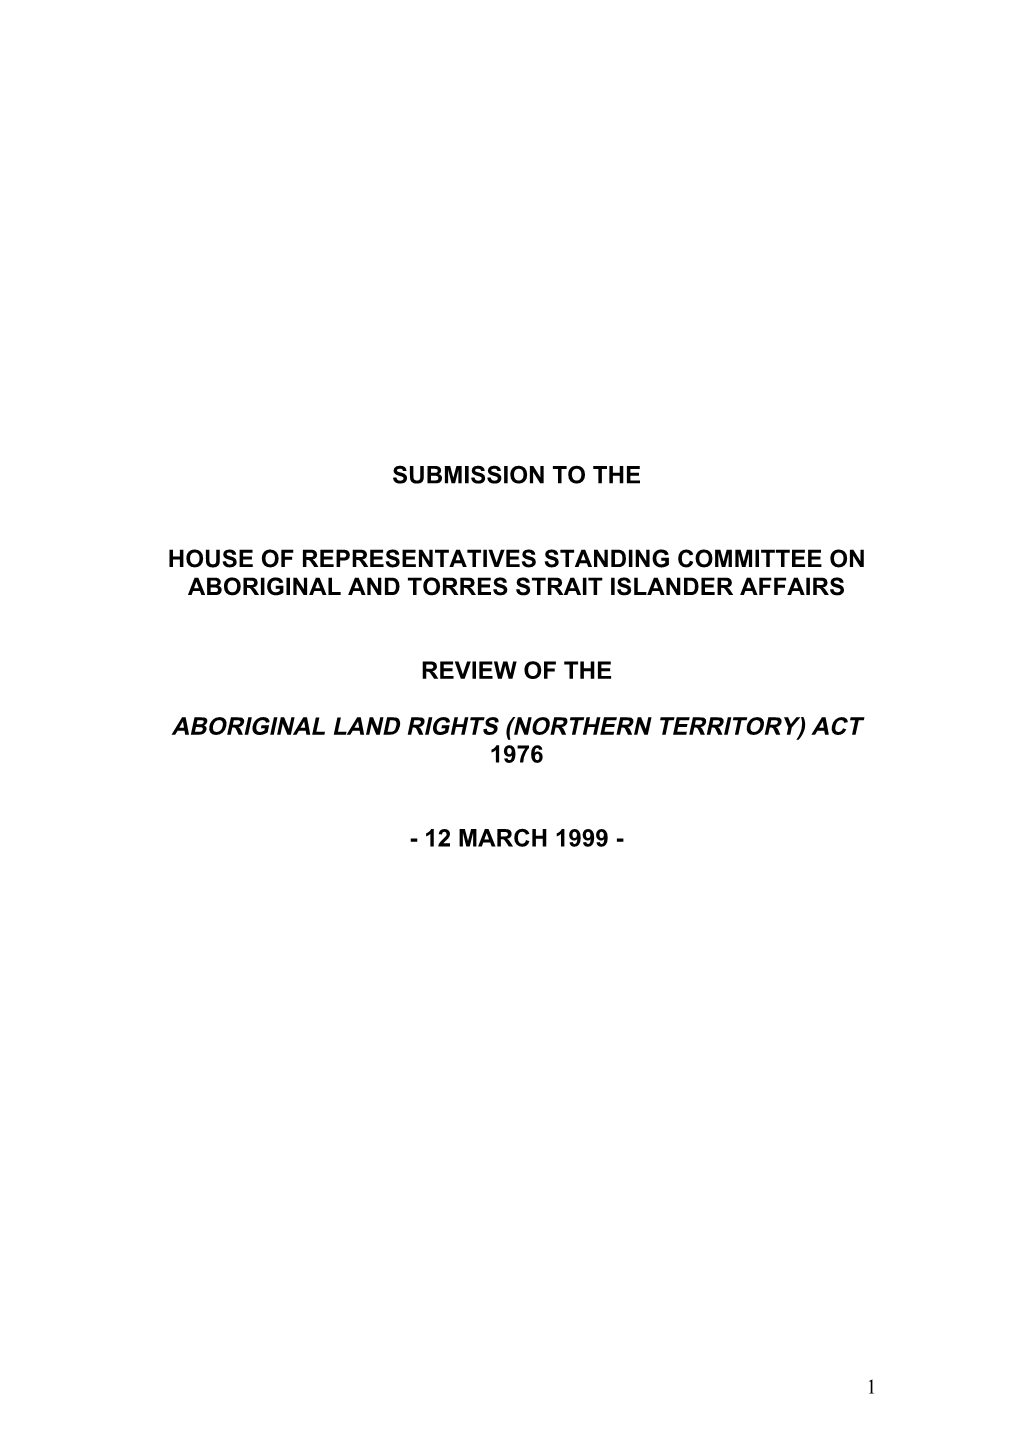 Submission to the House of Representatives Standing